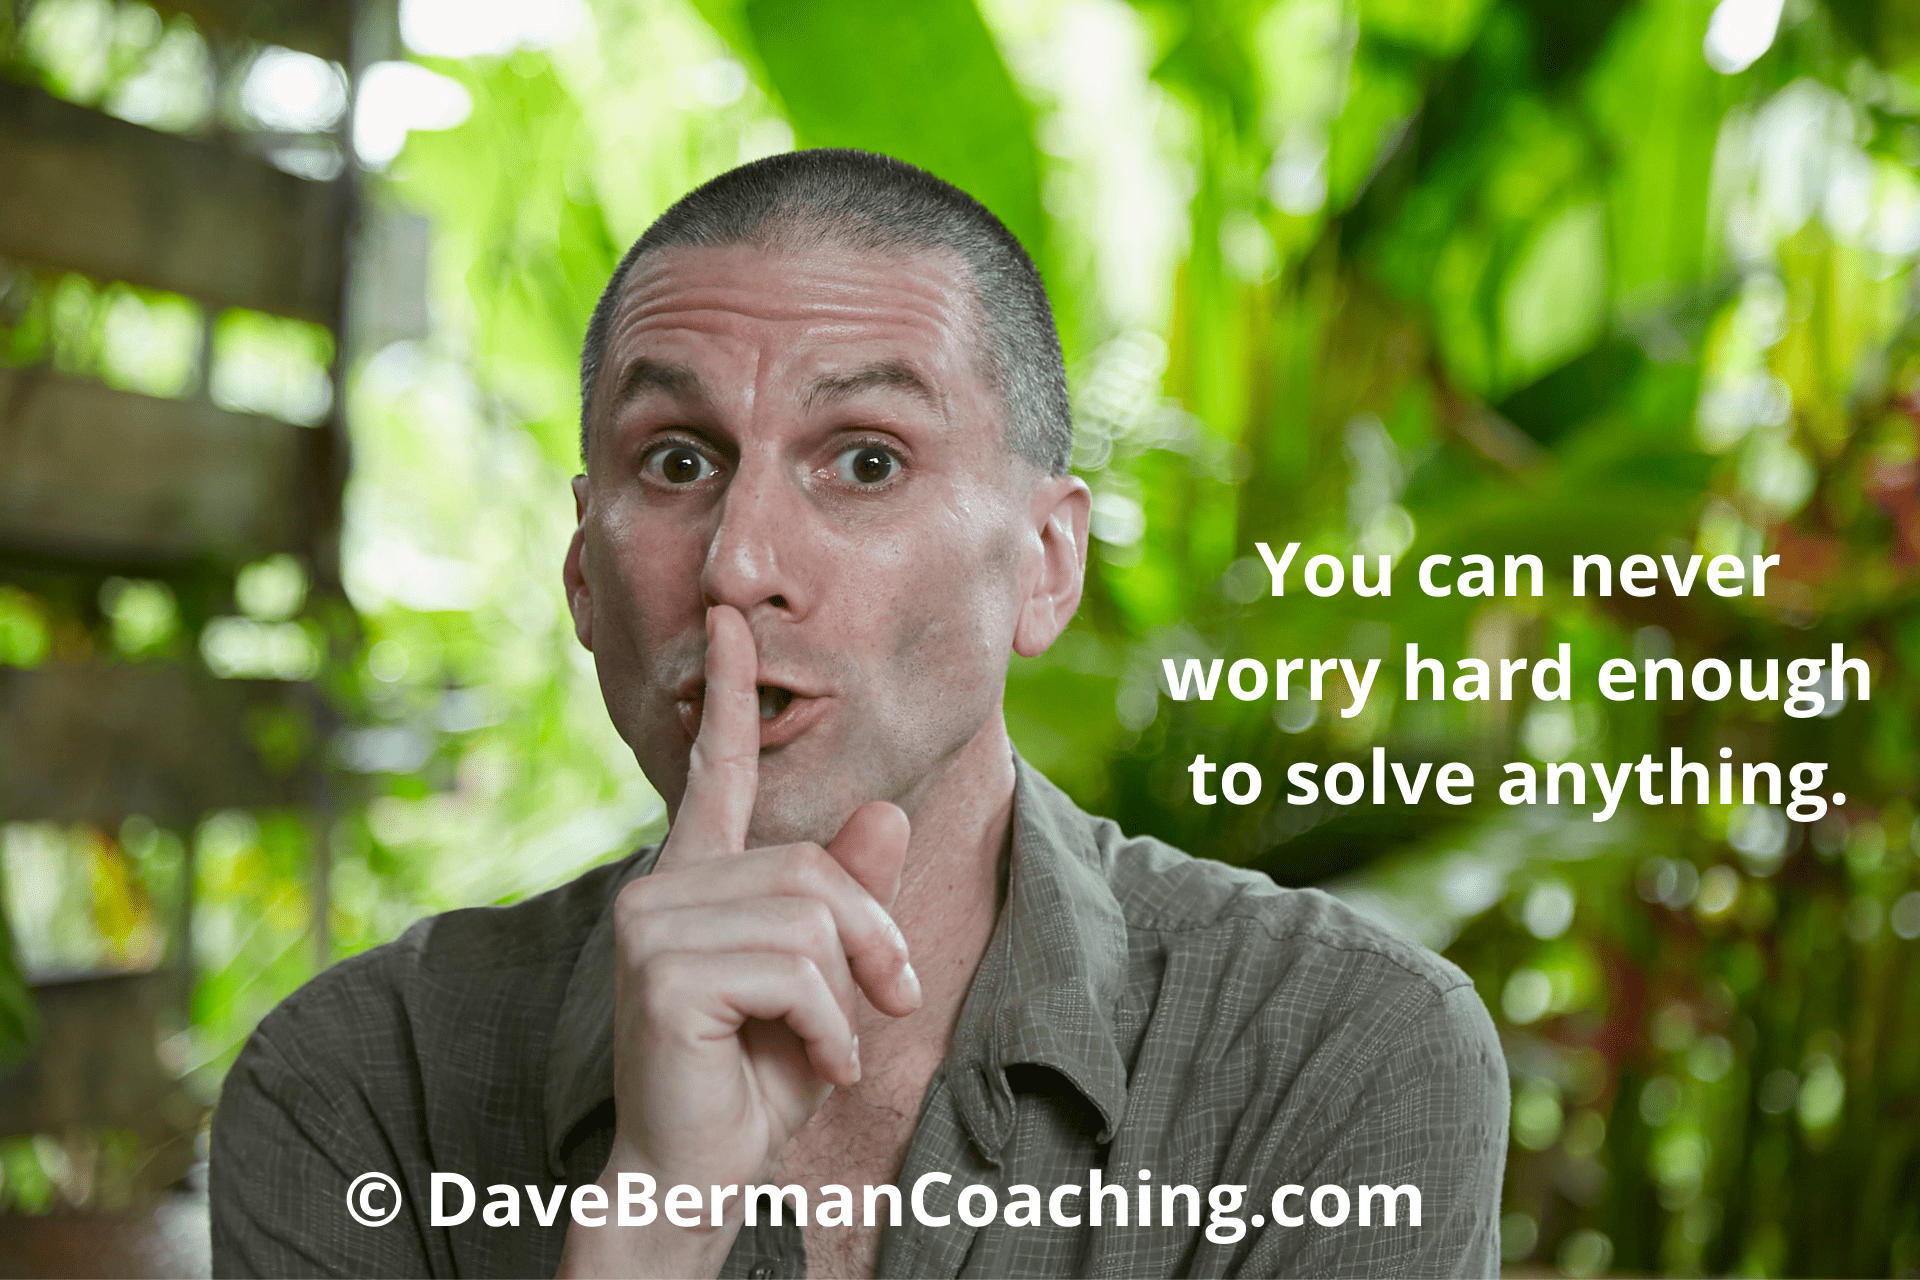 Dave's index finger is in front of his lips to suggest quiet next to the words: "You can never worry hard enough to solve anything." © DaveBermanCoaching.com